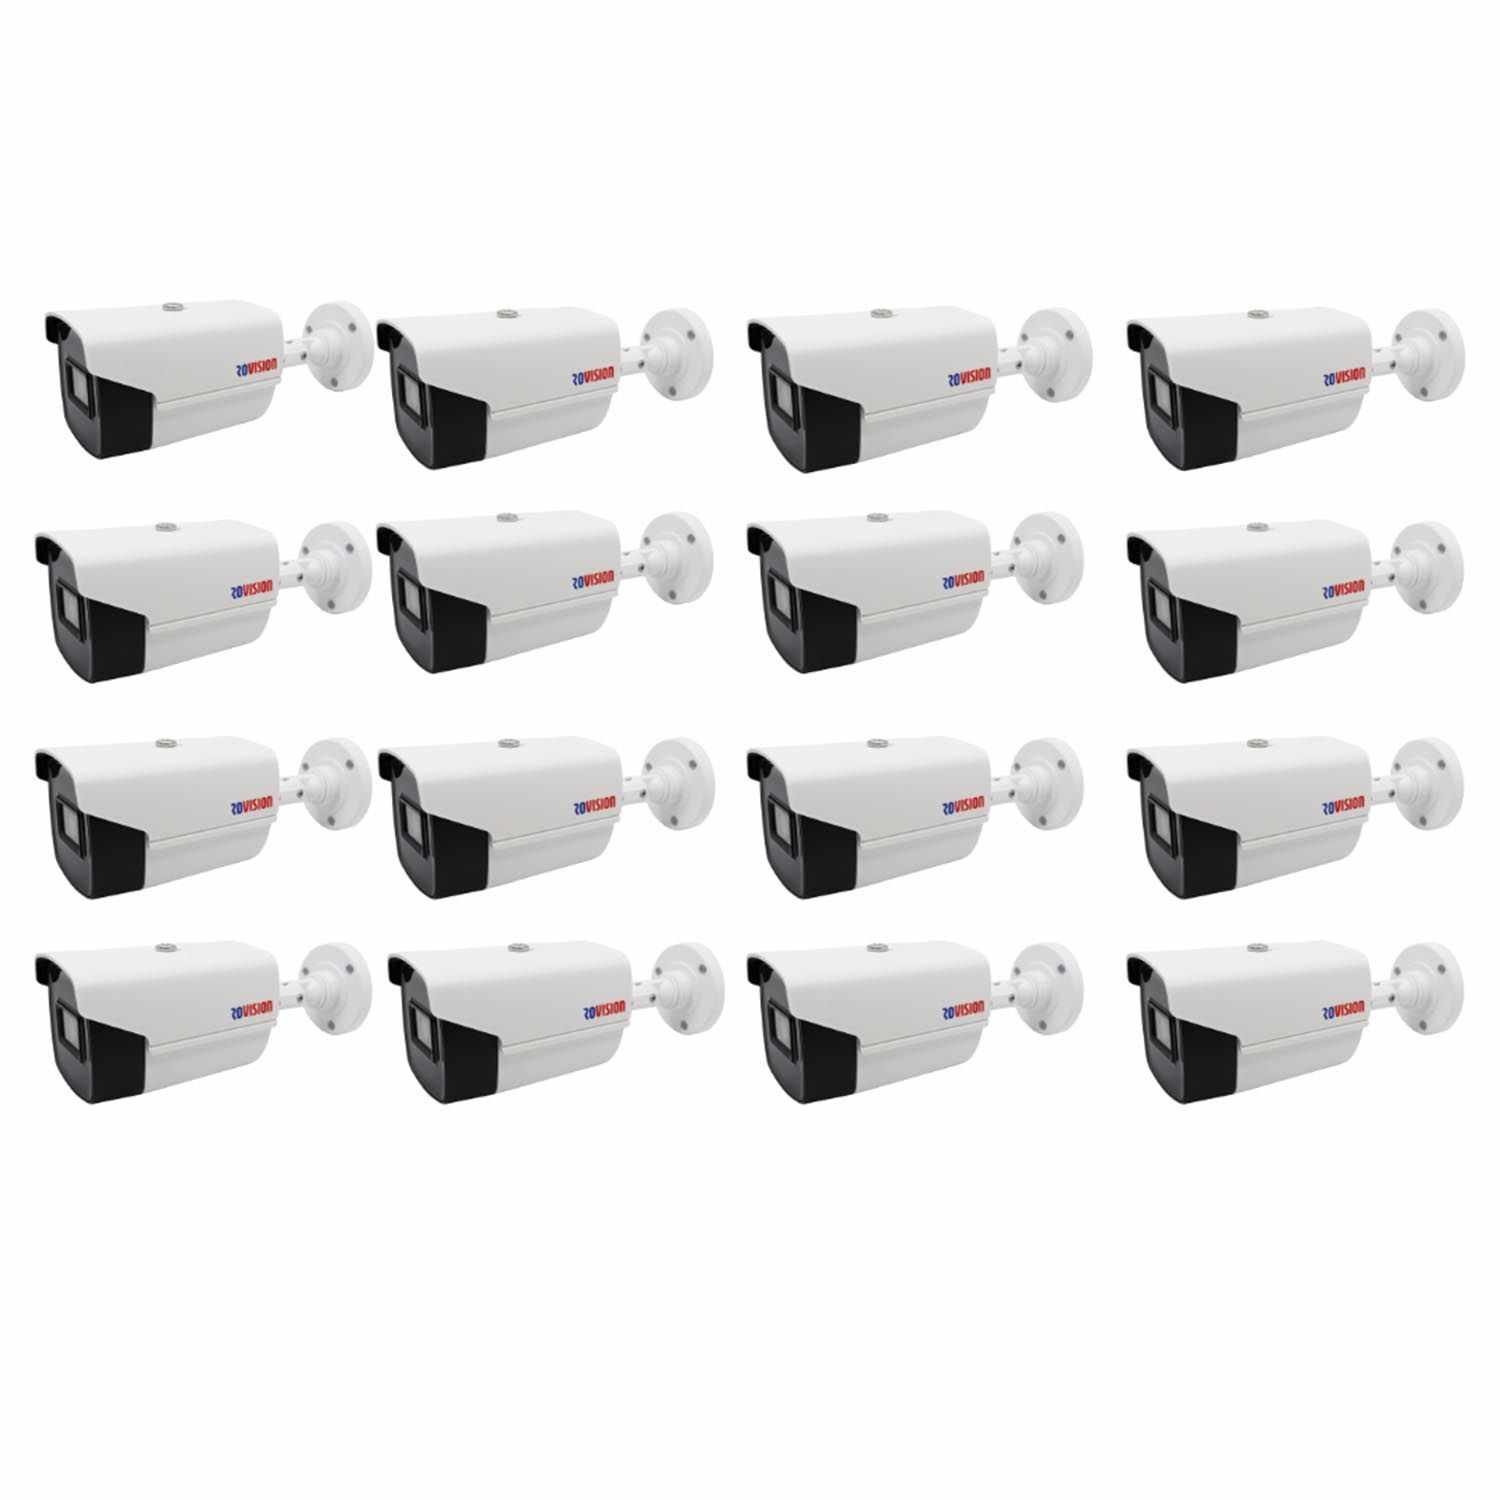 16 camere ROVISION2MP22 oem Hikvision Full HD 2MP, 2.8mm, IR 40m